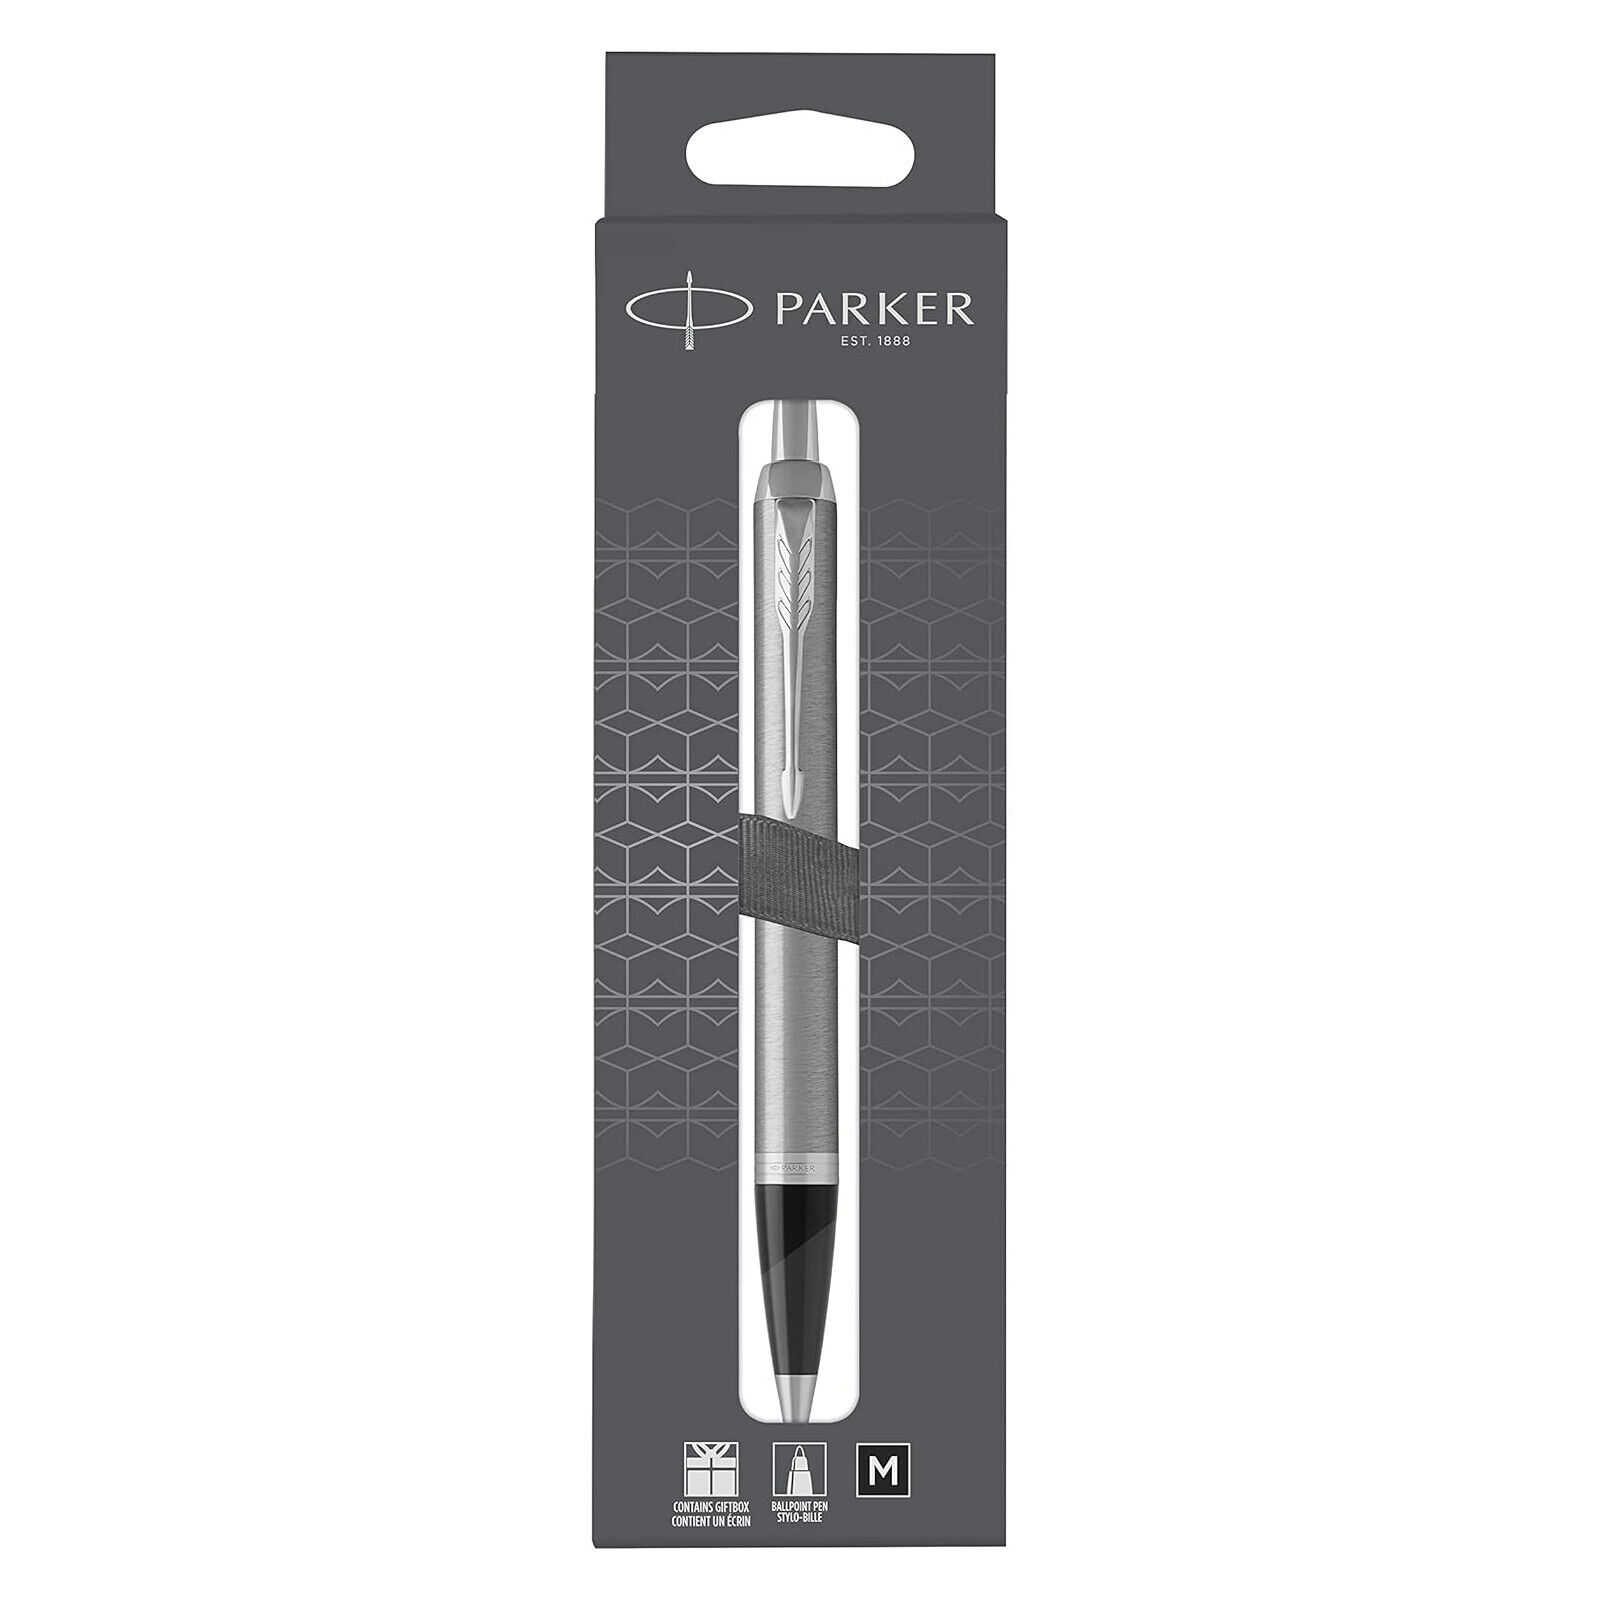 Parker IM Ballpoint Pen Stainless Steel with Chrome Trim Medium Point with Black